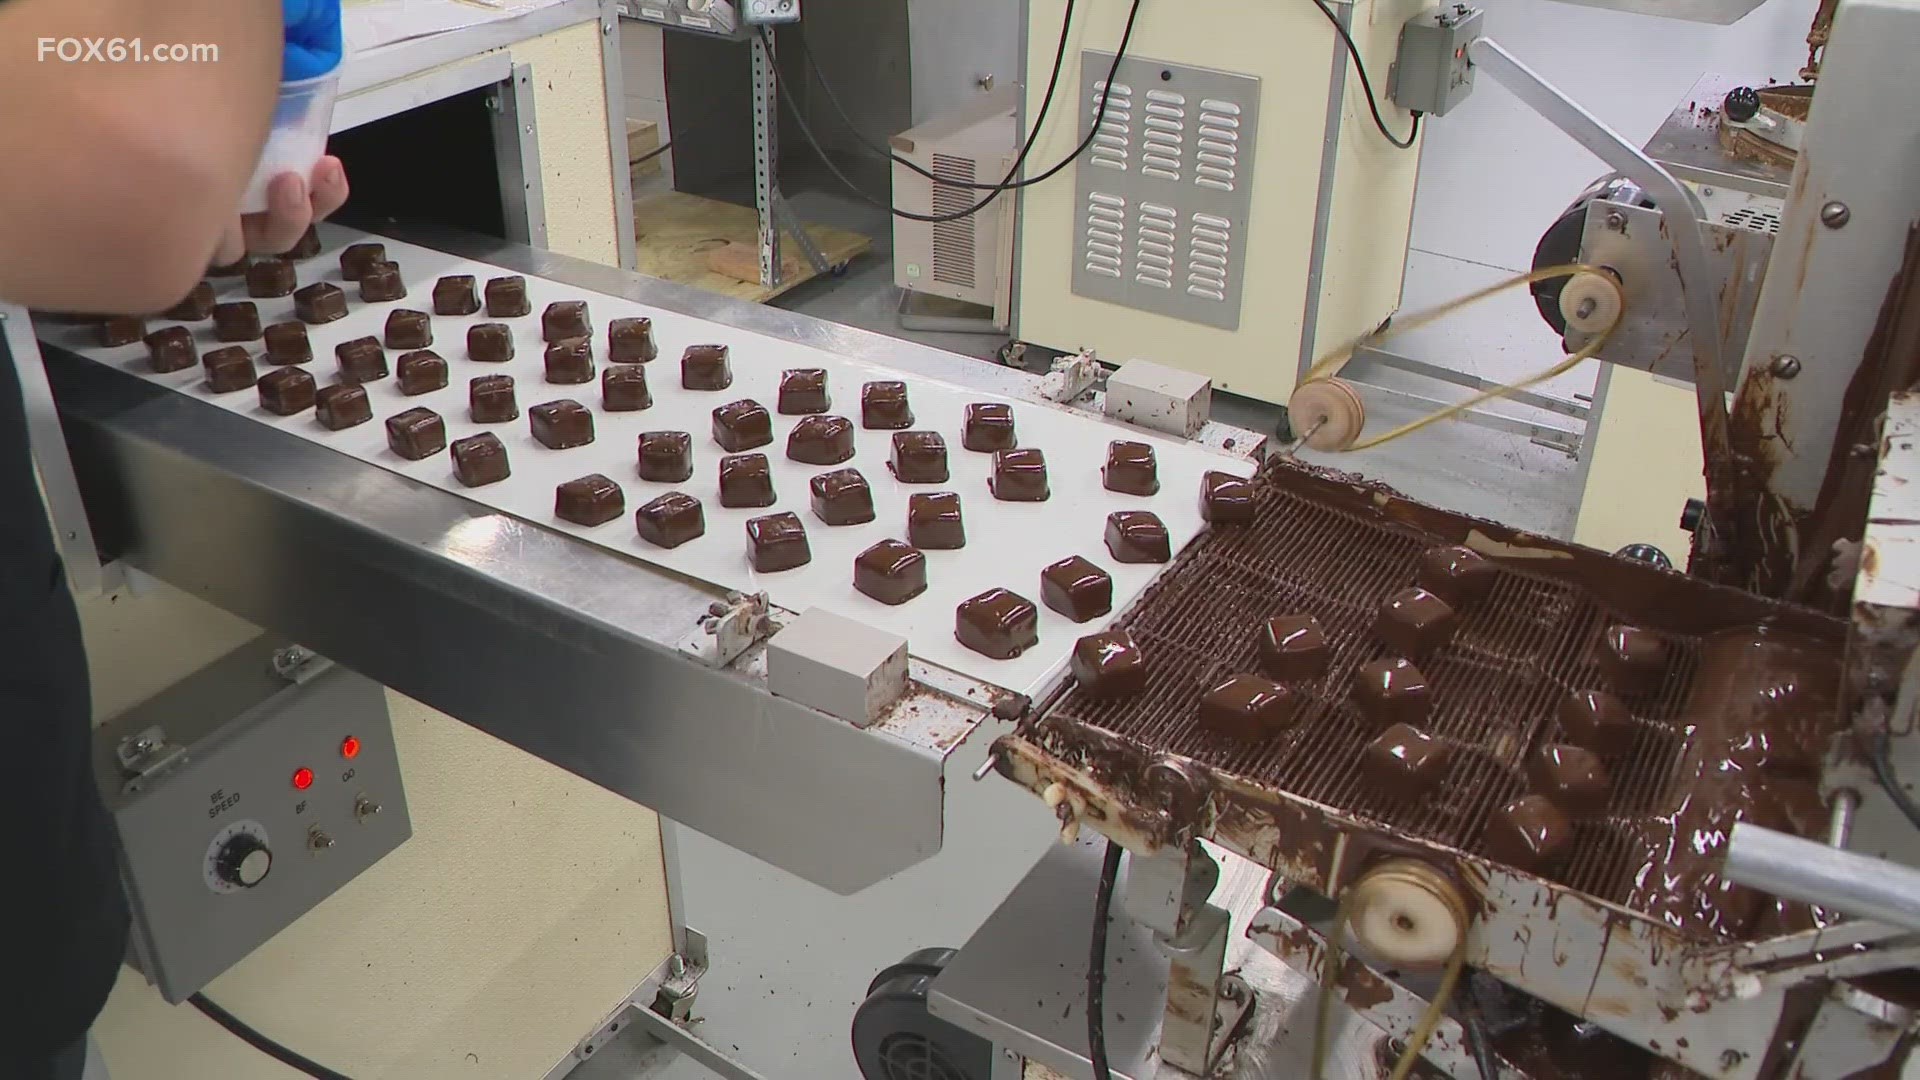 The longtime chocolate maker continues a family tradition.